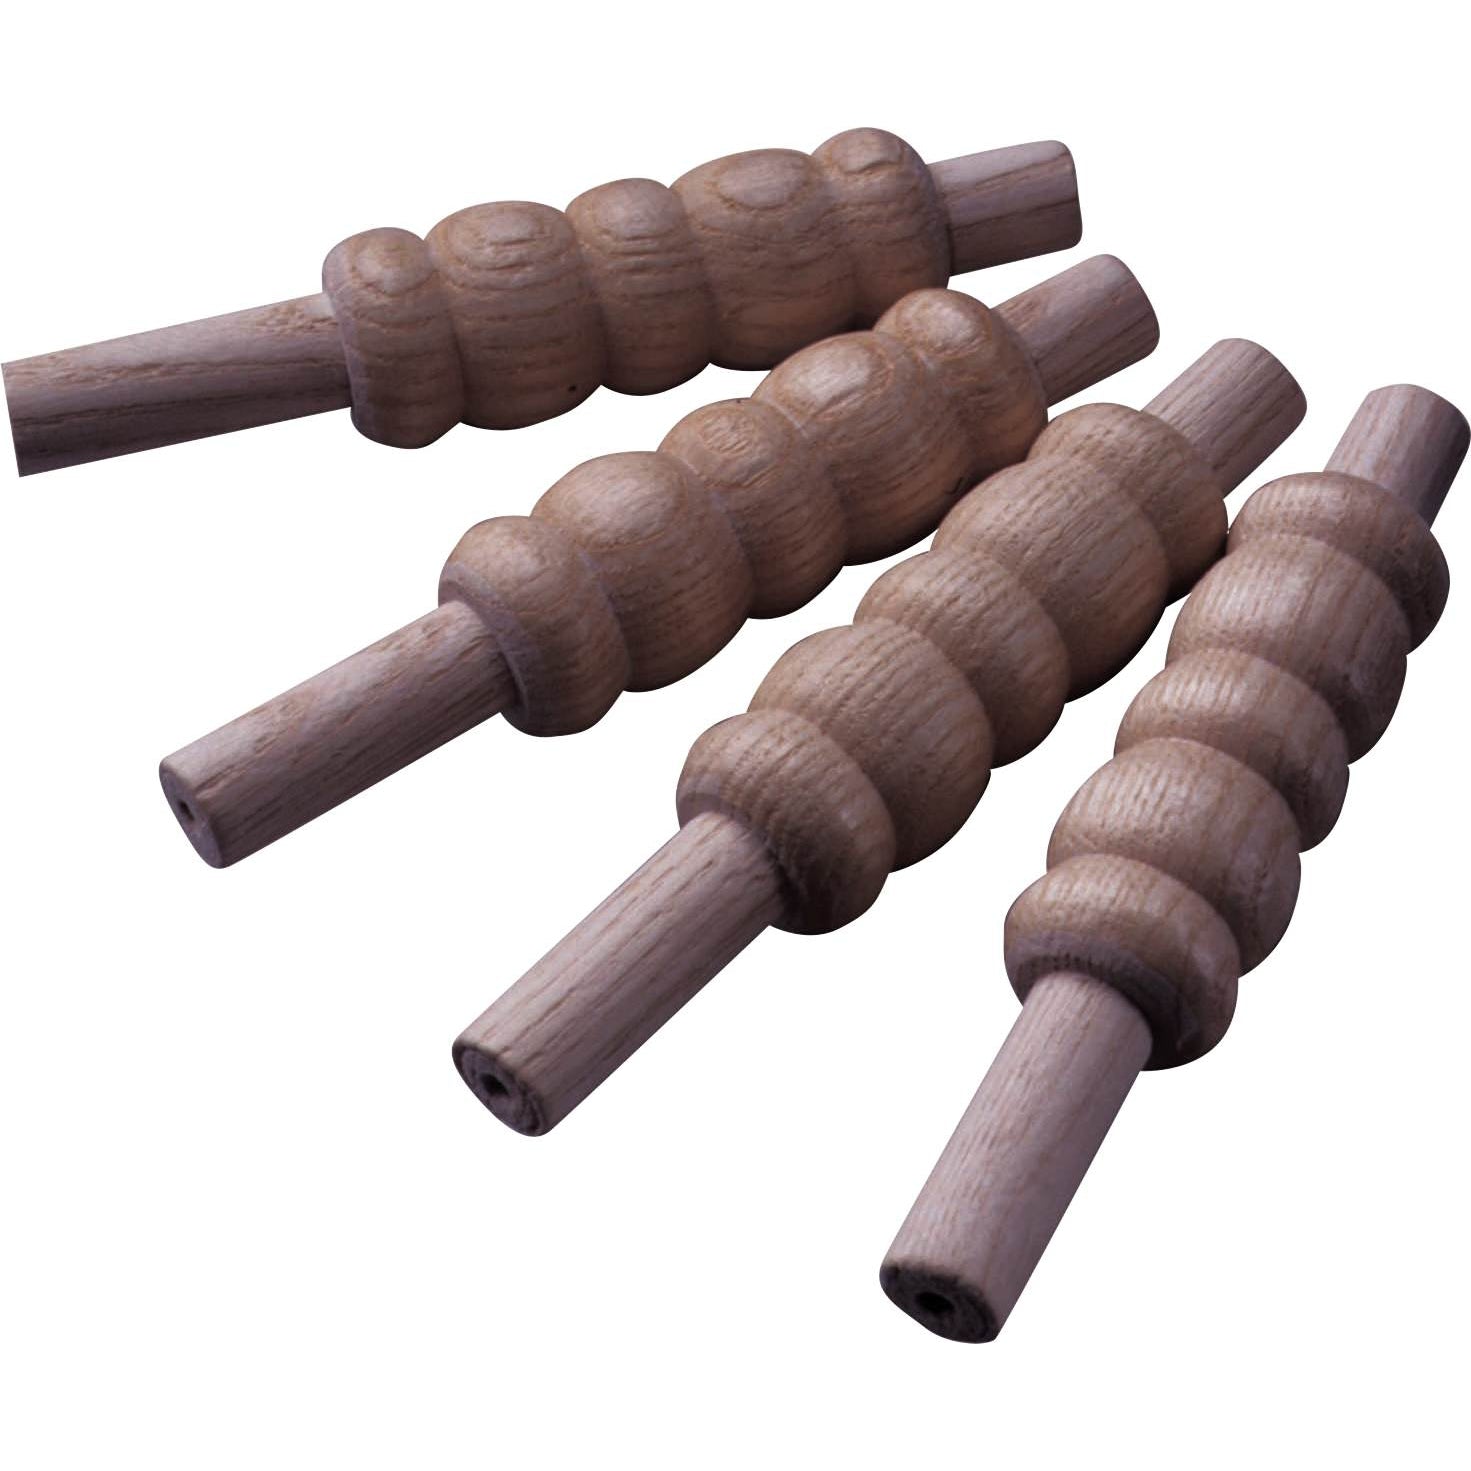 Heavy Spare Ash Bails (Set Of 4)